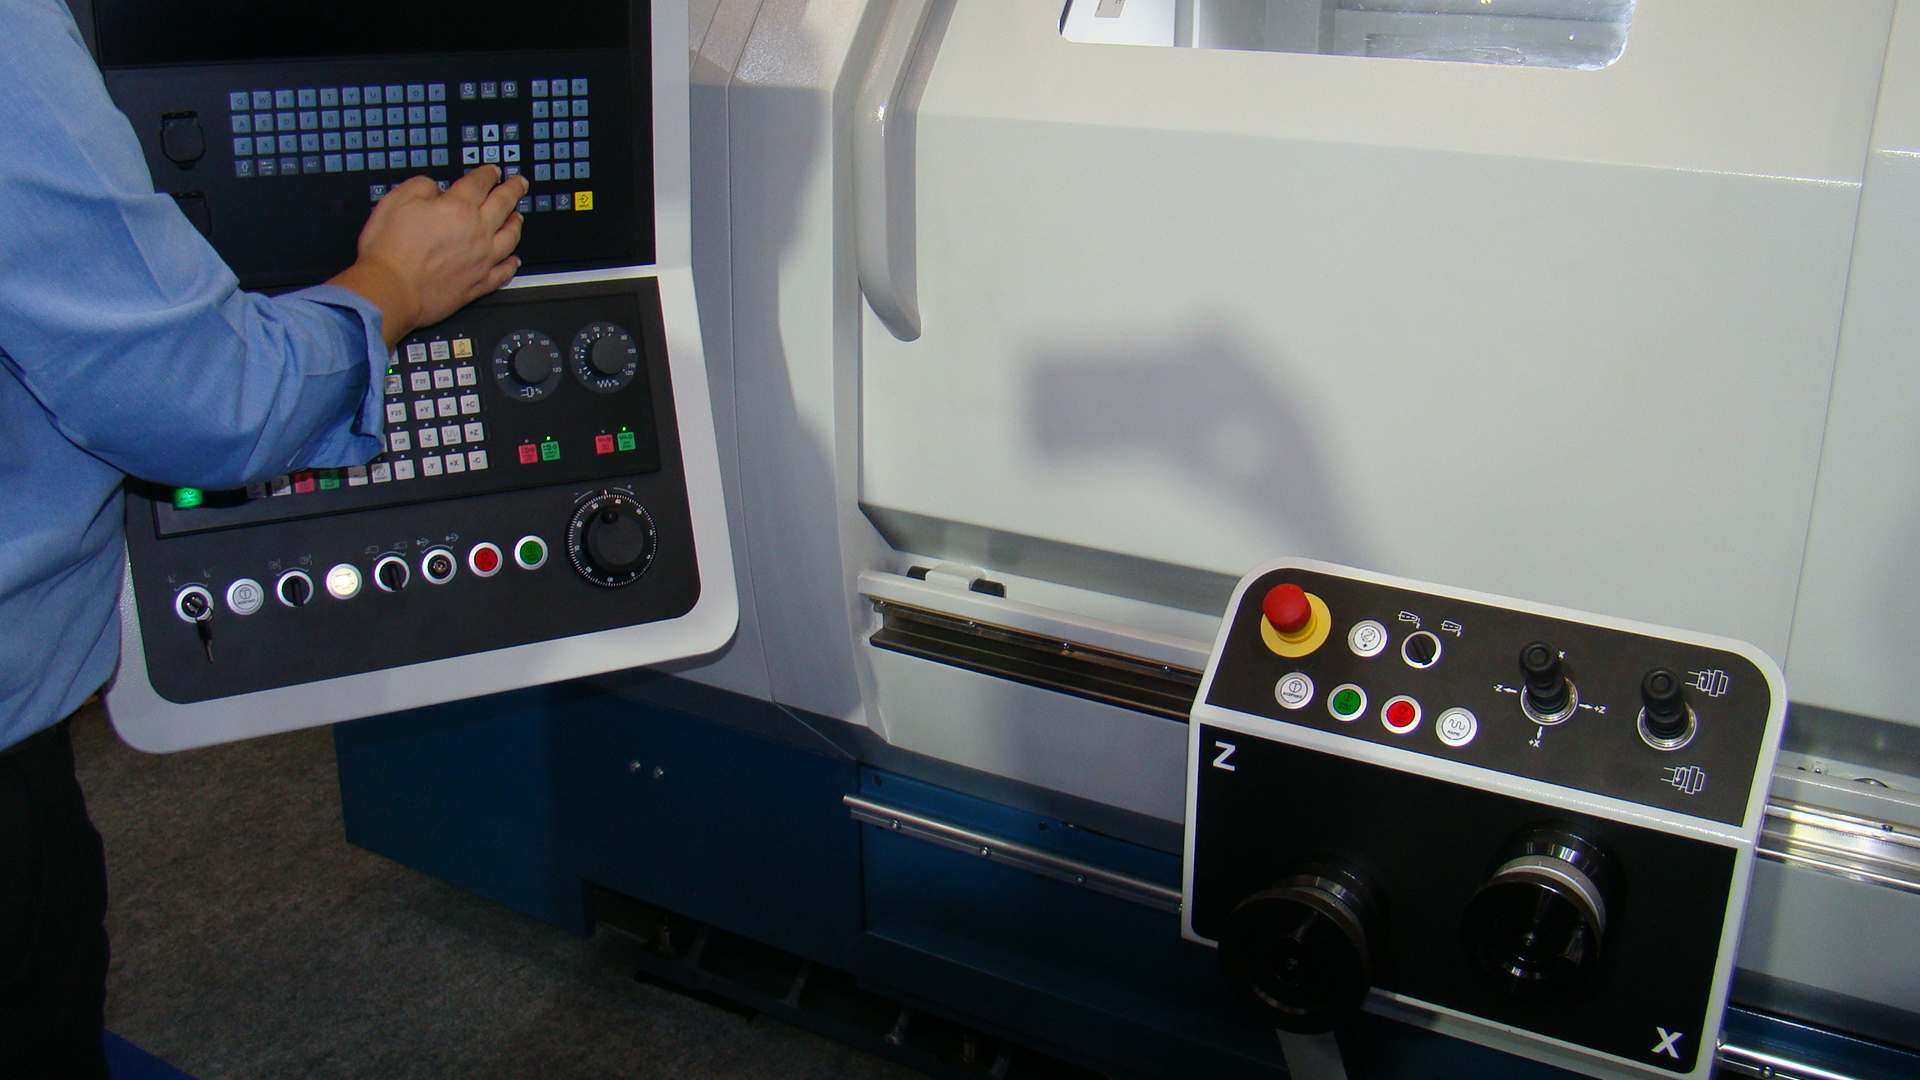 The Romi Centur 35 toolroom, or teaching, lathe enables CNC and manual operation.